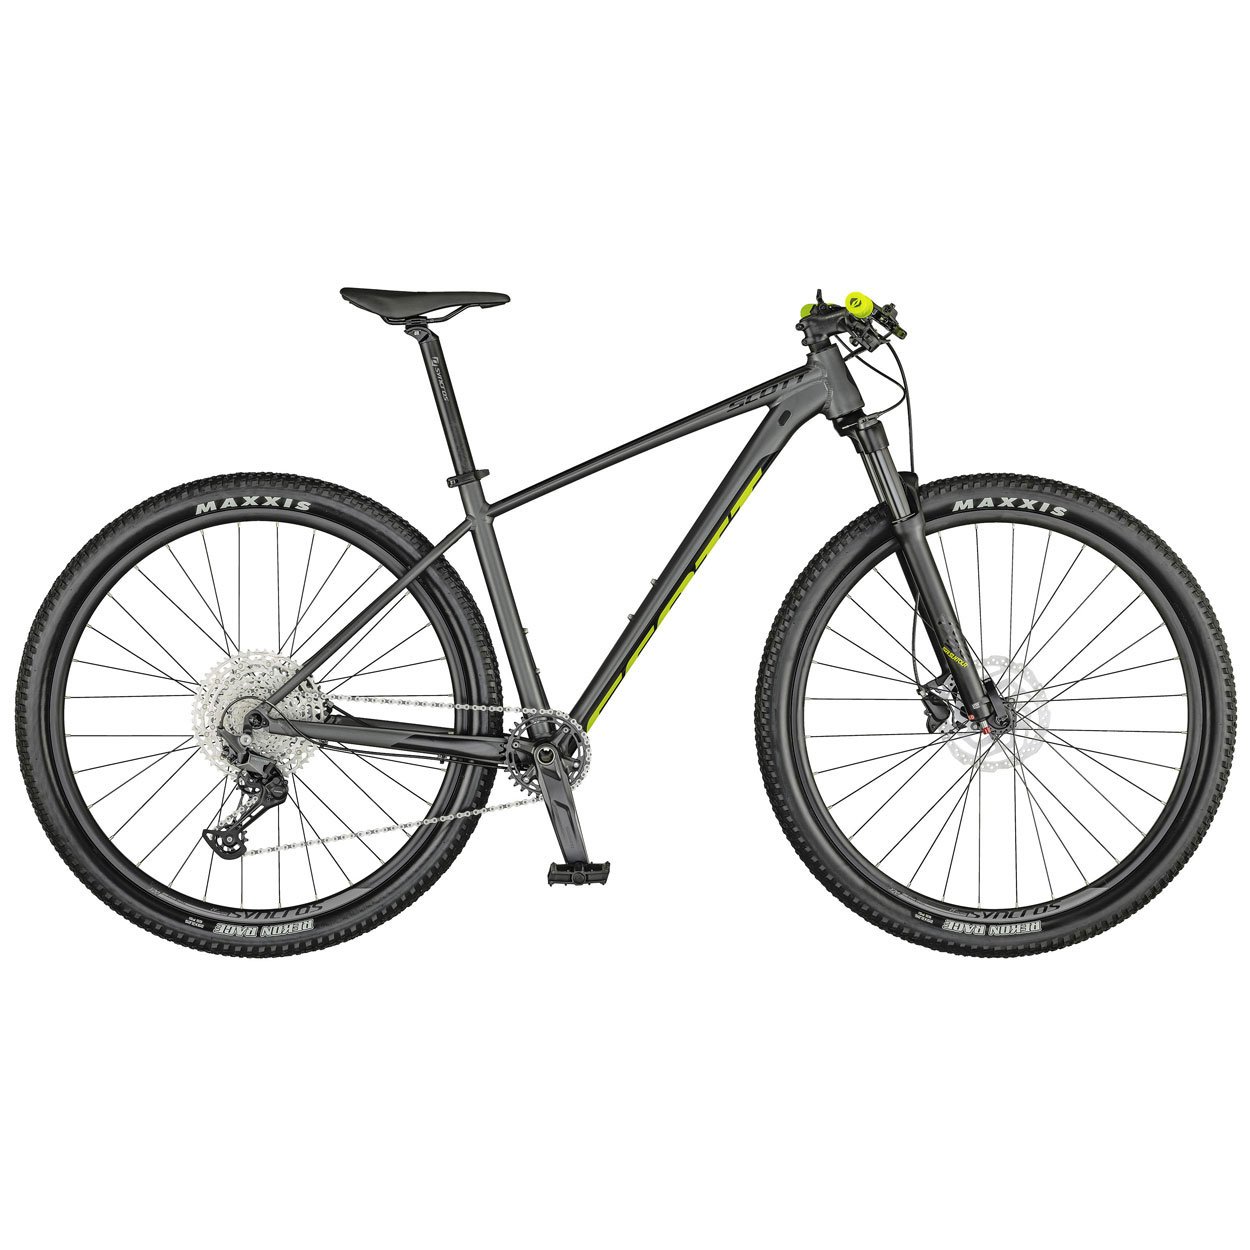 Bike hire - Scott Scale 980 (small frame, rider height 160-173mm)